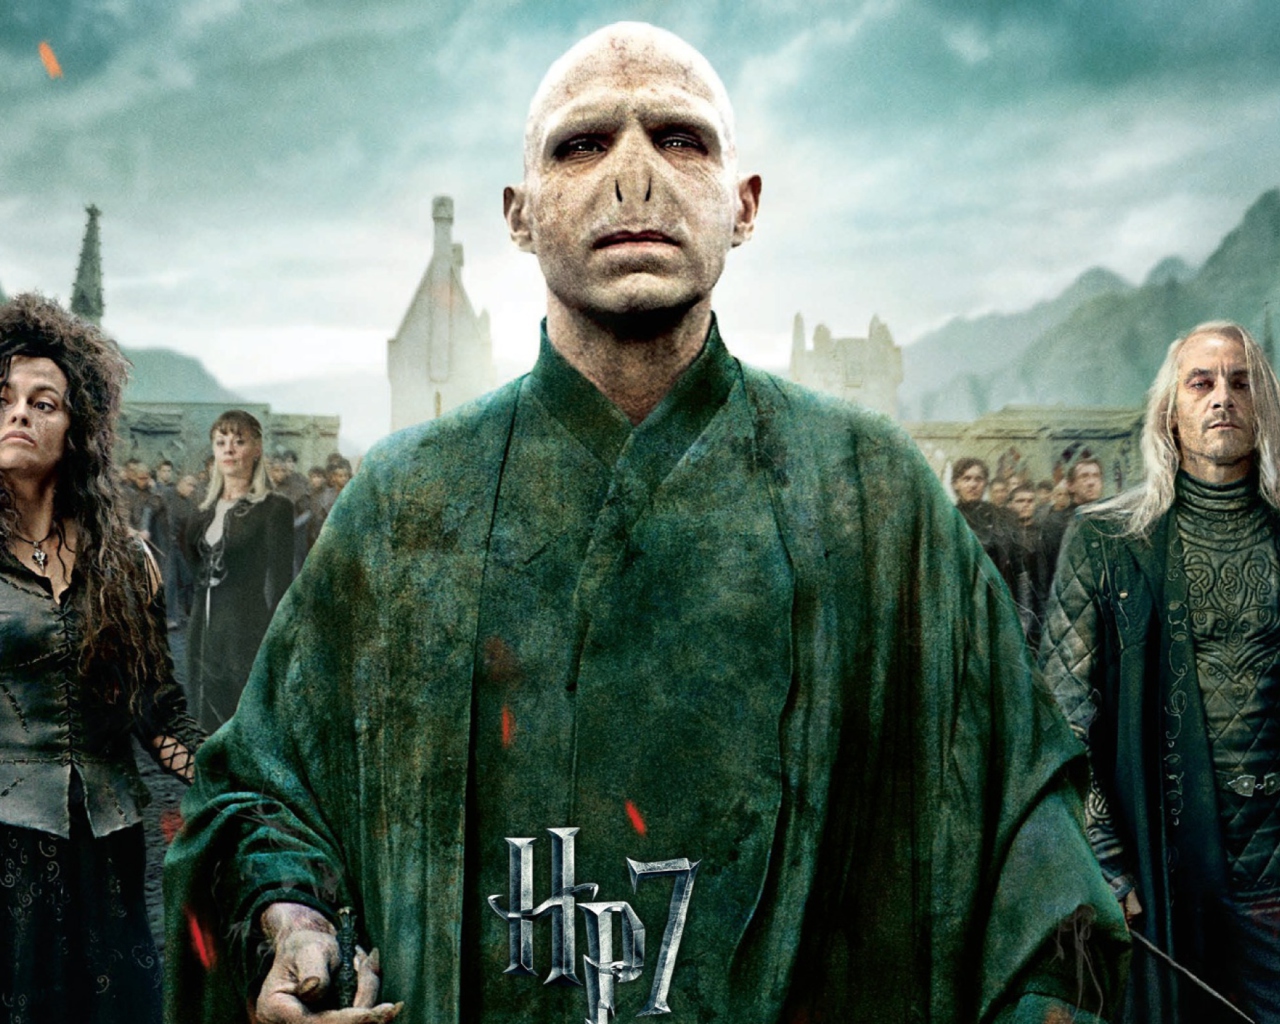 Harry Potter And The Deathly Hallows Part 2 wallpaper 1280x1024